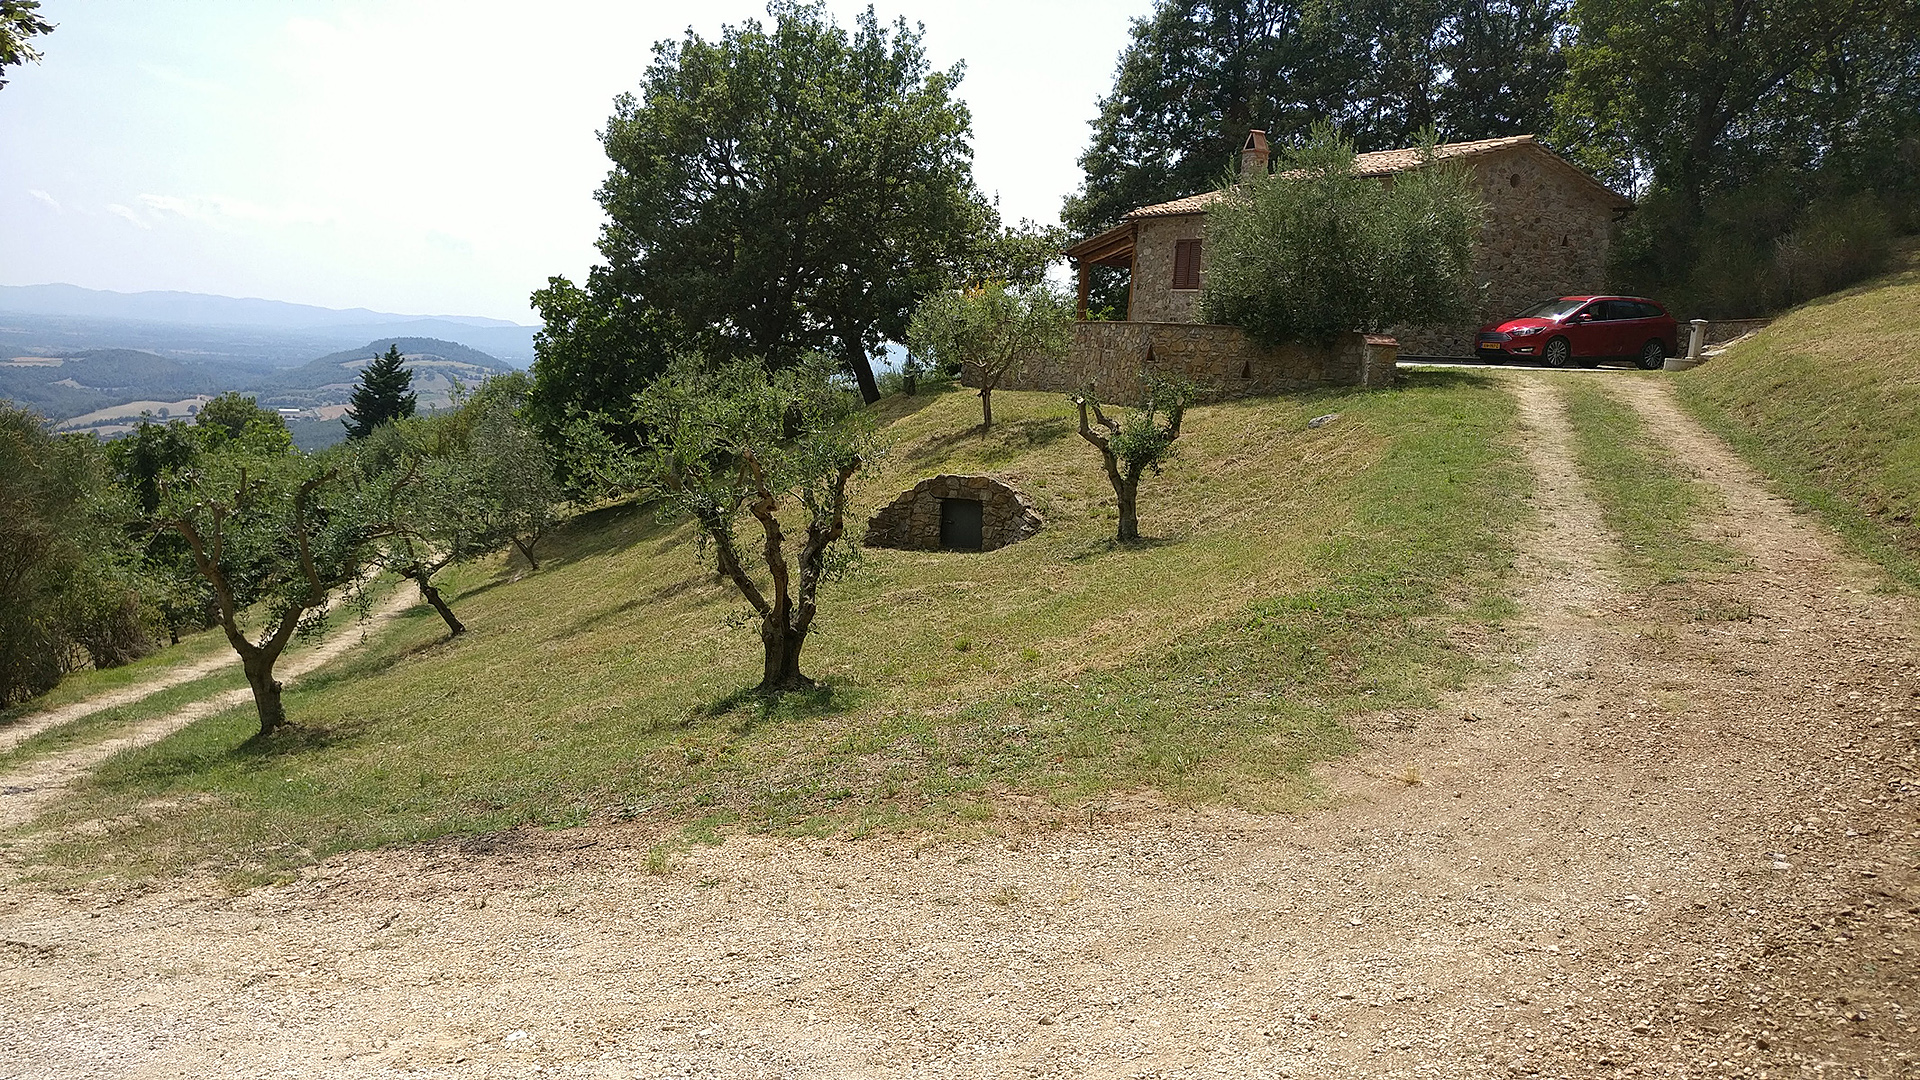 Landhuis in Toscane, Itali, Country house in Tuscany, Italy